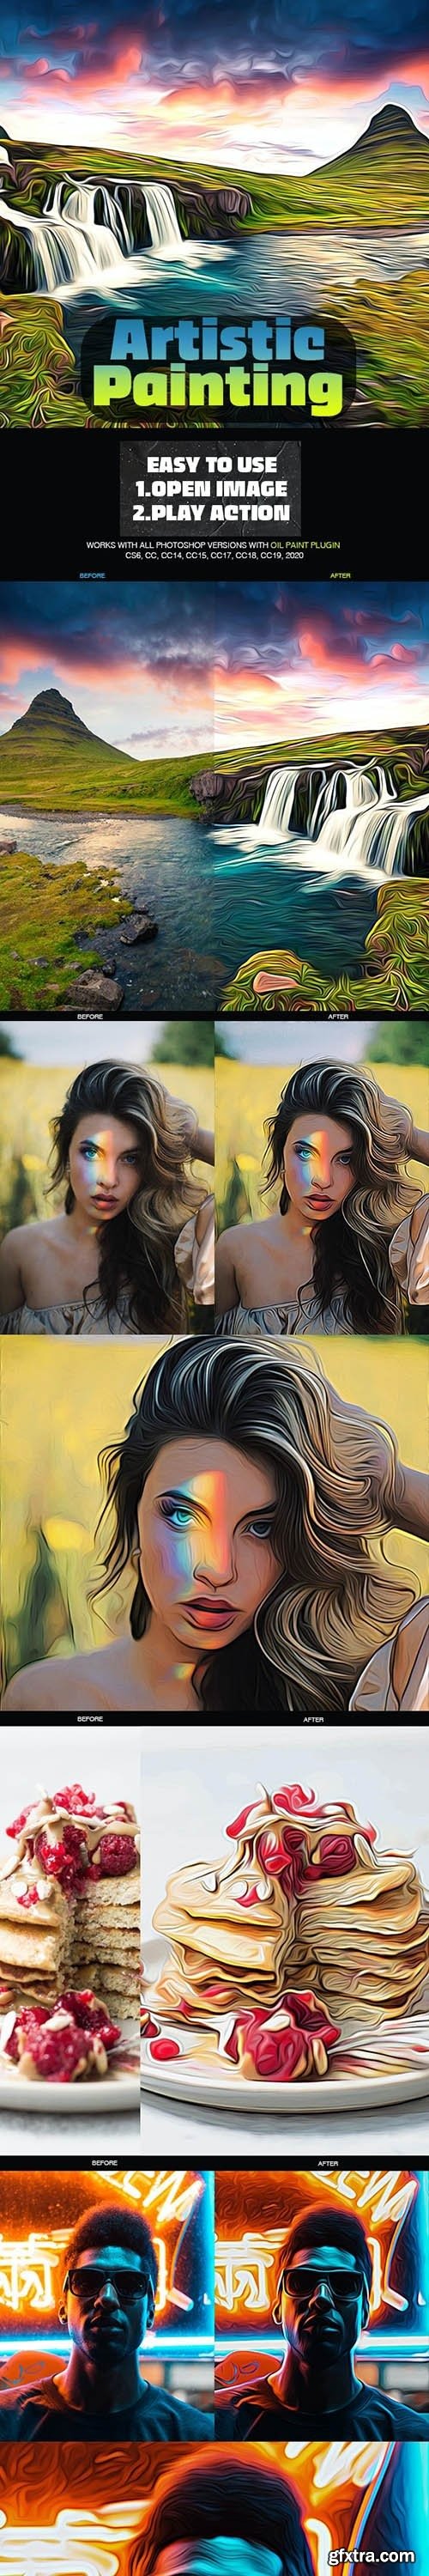 GraphicRiver - Artistic Painting Photoshop Action 26590064